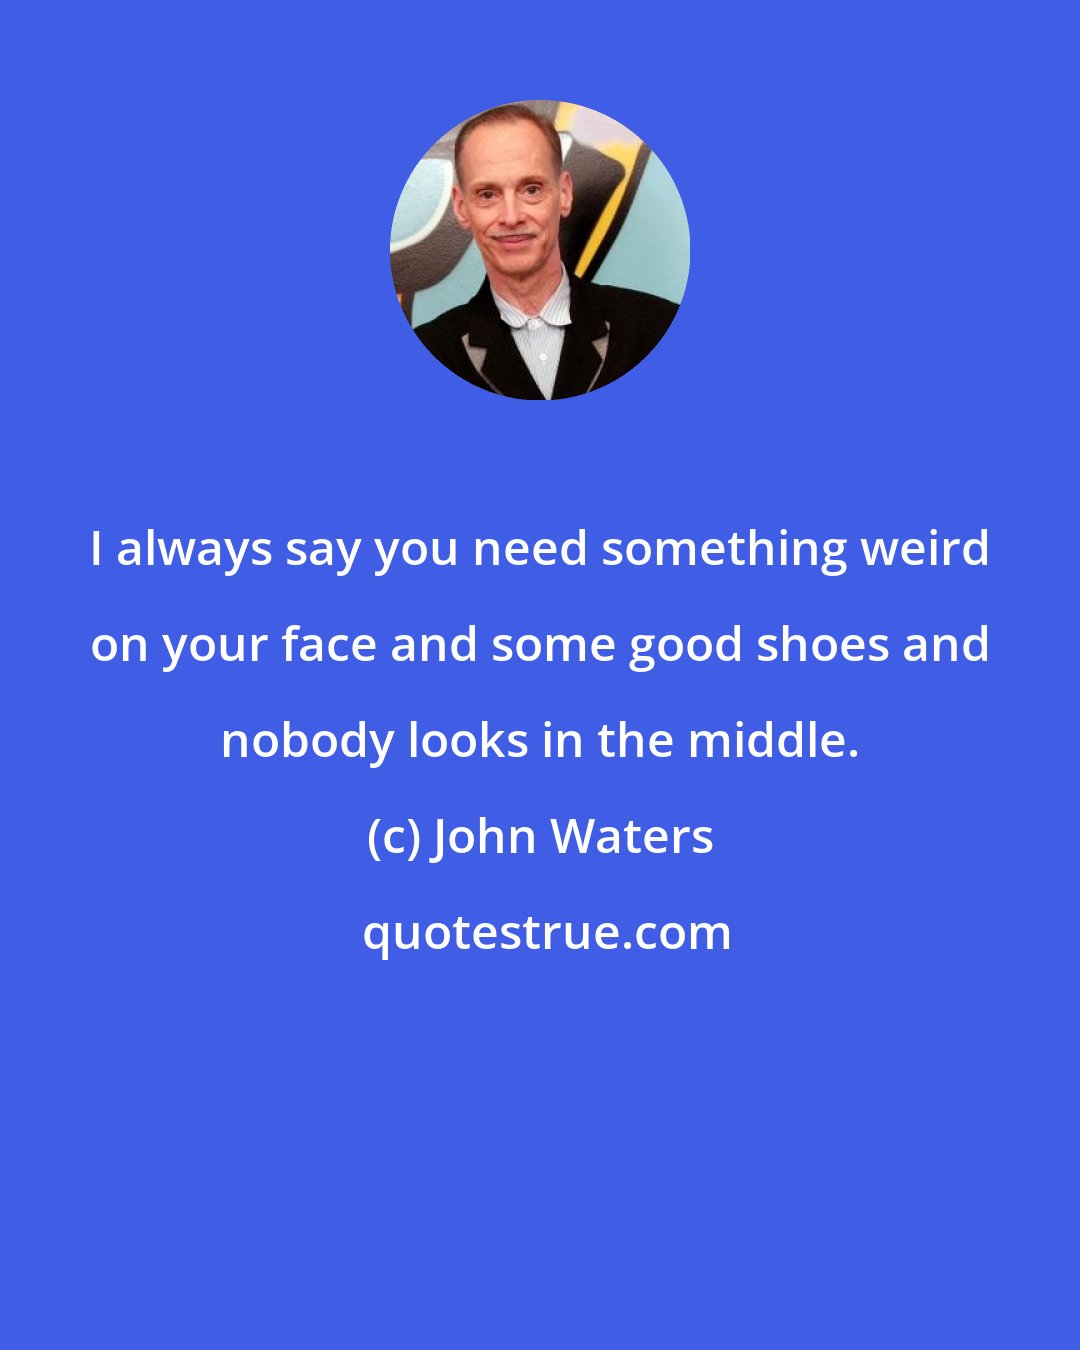 John Waters: I always say you need something weird on your face and some good shoes and nobody looks in the middle.